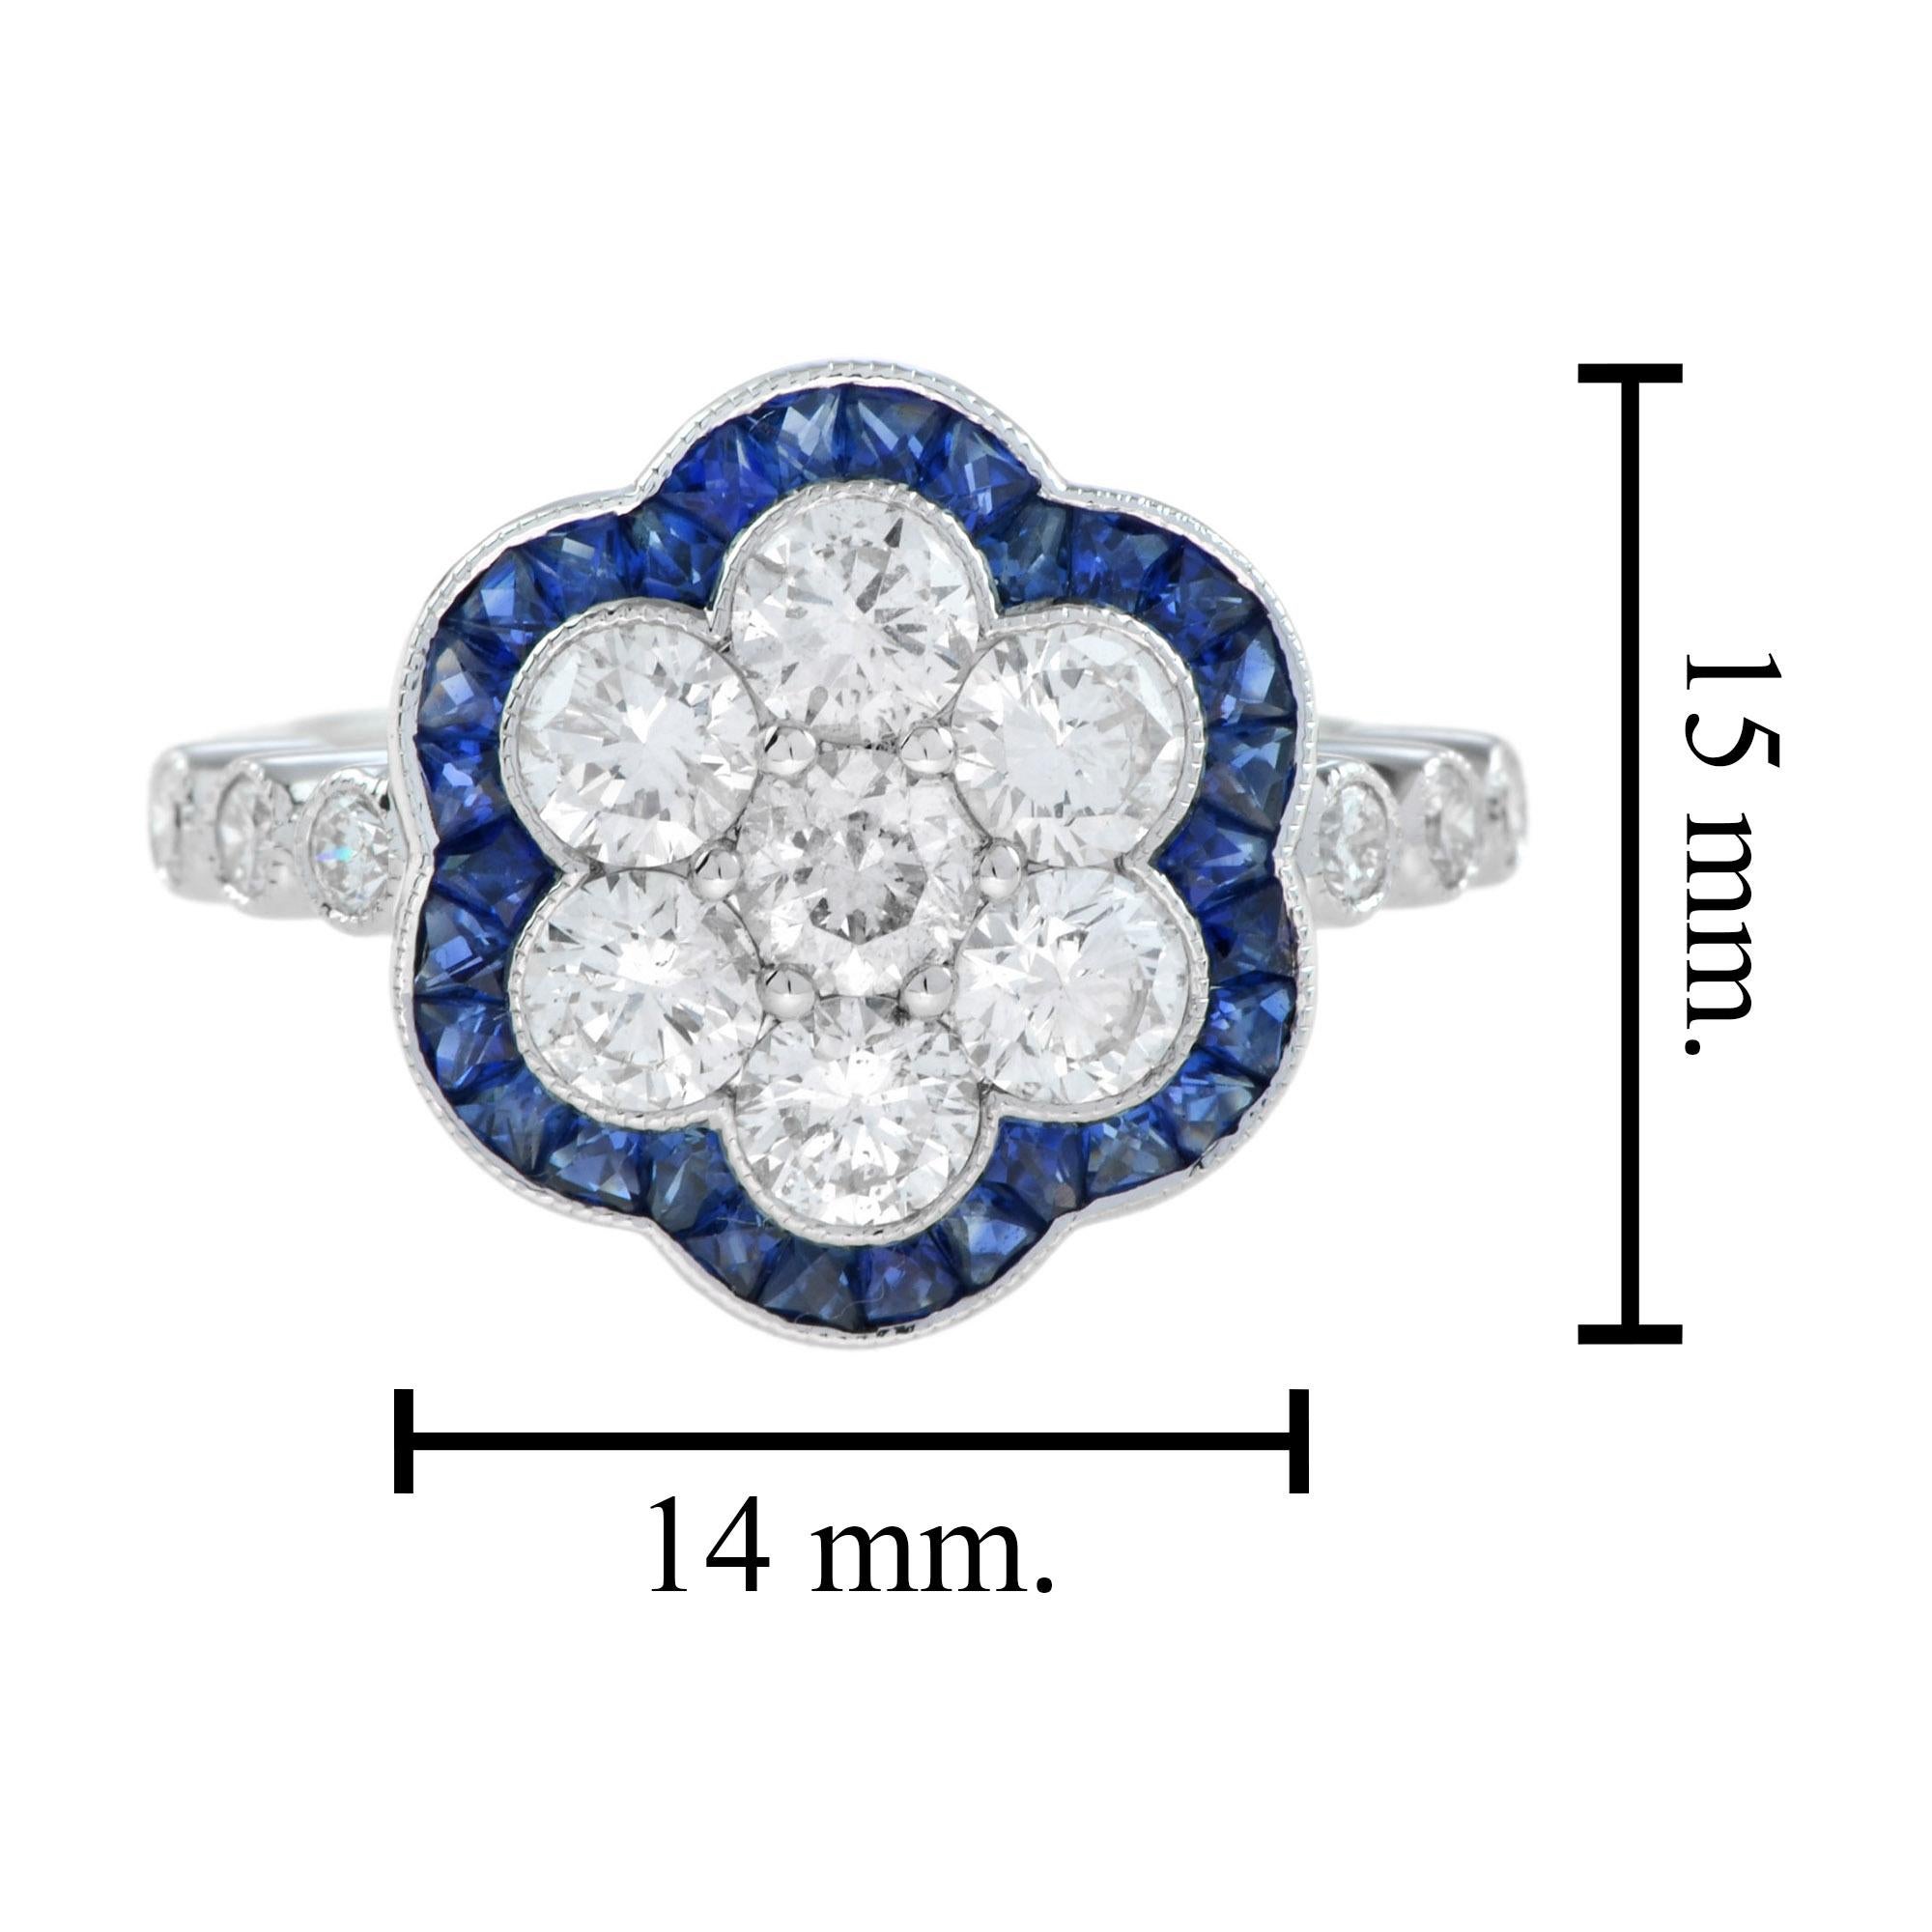 Art Deco Style Diamond and Sapphire Cluster Ring in 18K White Gold 1